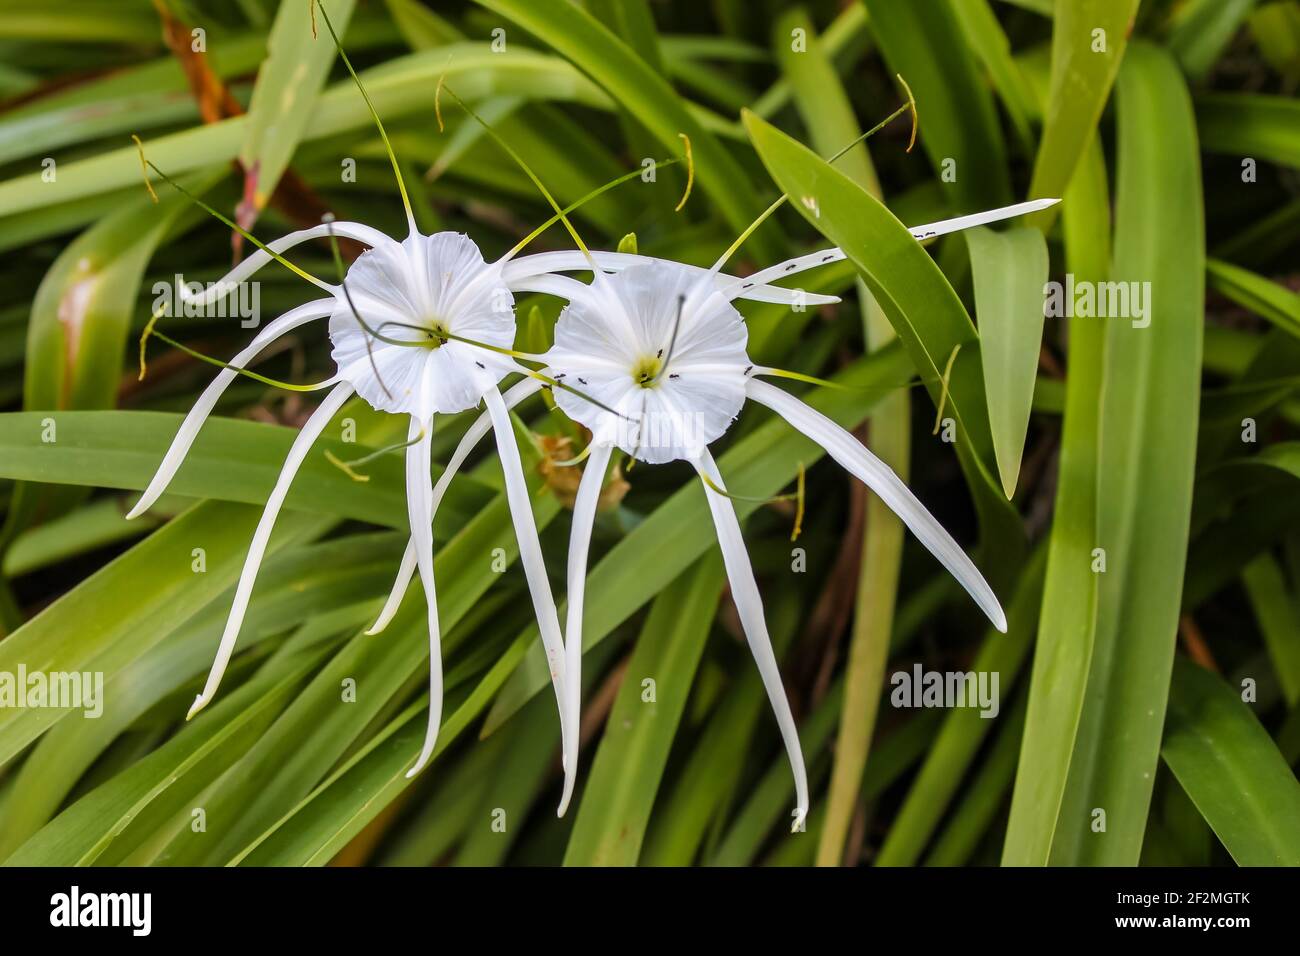 Ant highway - beautiful white semi-transparent white tropical flowers with long trendils that ants are using as a road against blurred green leaves Stock Photo